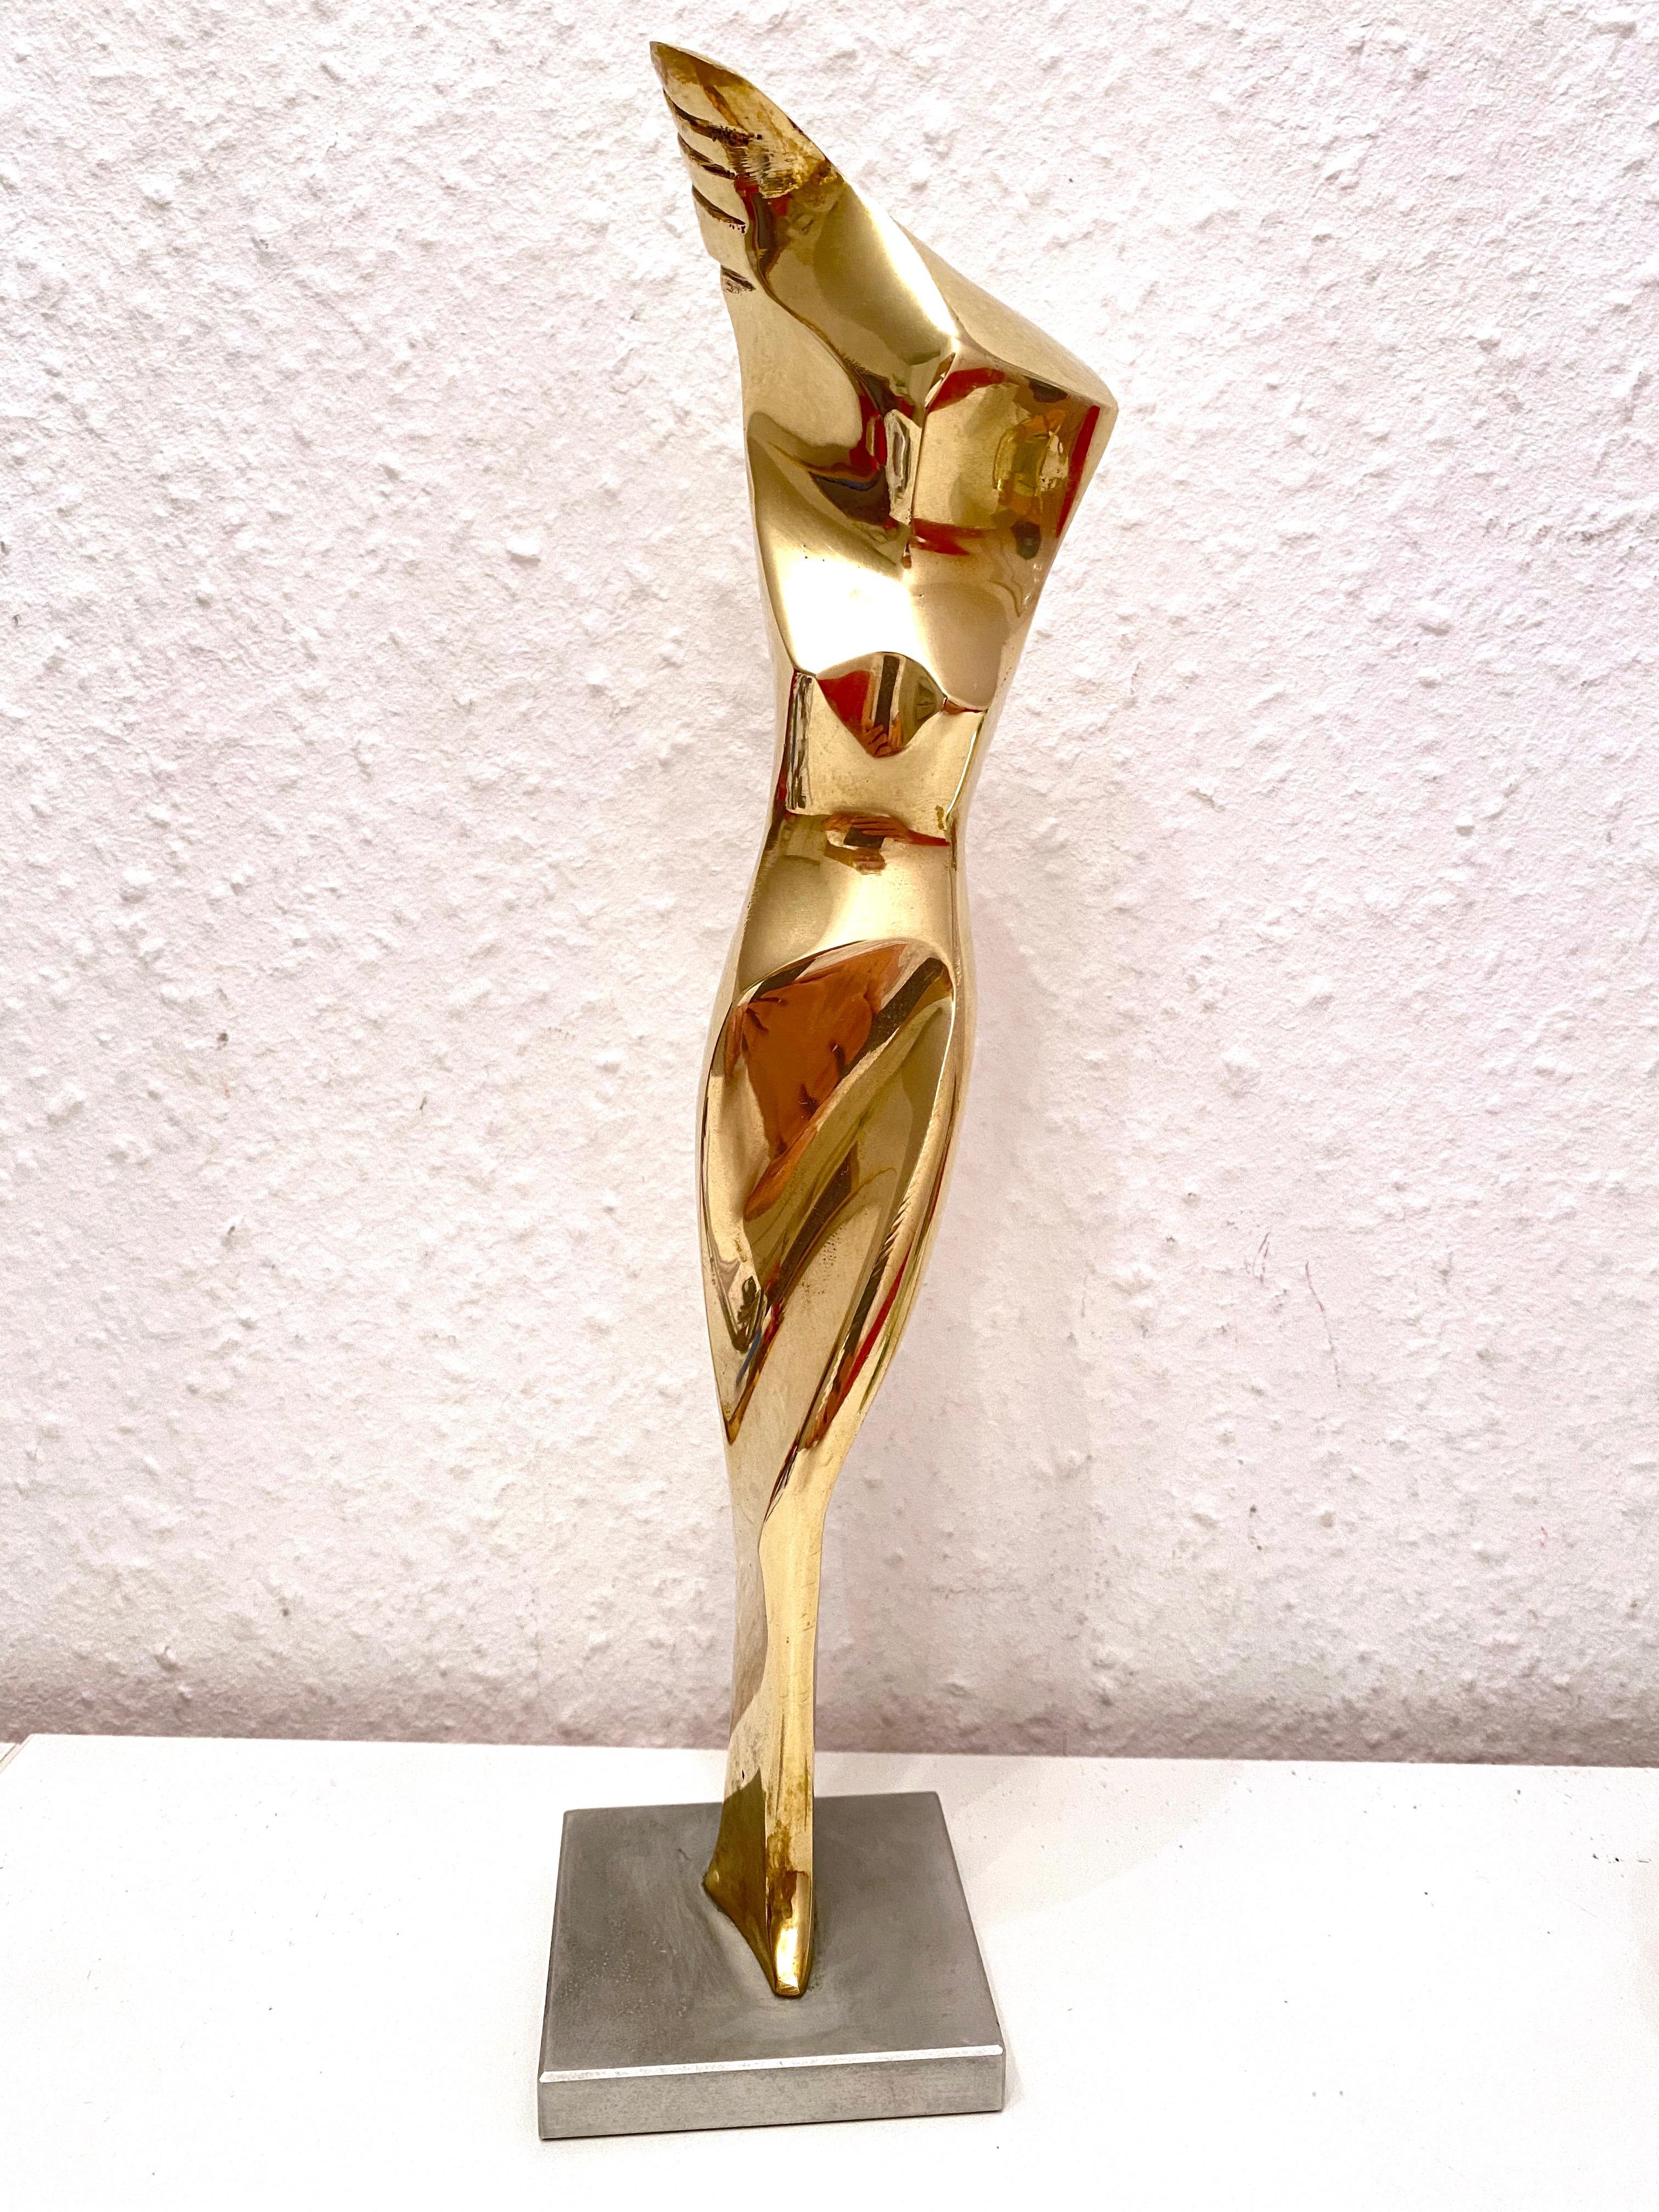 A modernist abstract figurative sculpture, made of brass. We believe it can be the Torso of Venus the goddess of love, beauty, desire, fertility and prosperity. It will make a beautiful addition to any room.